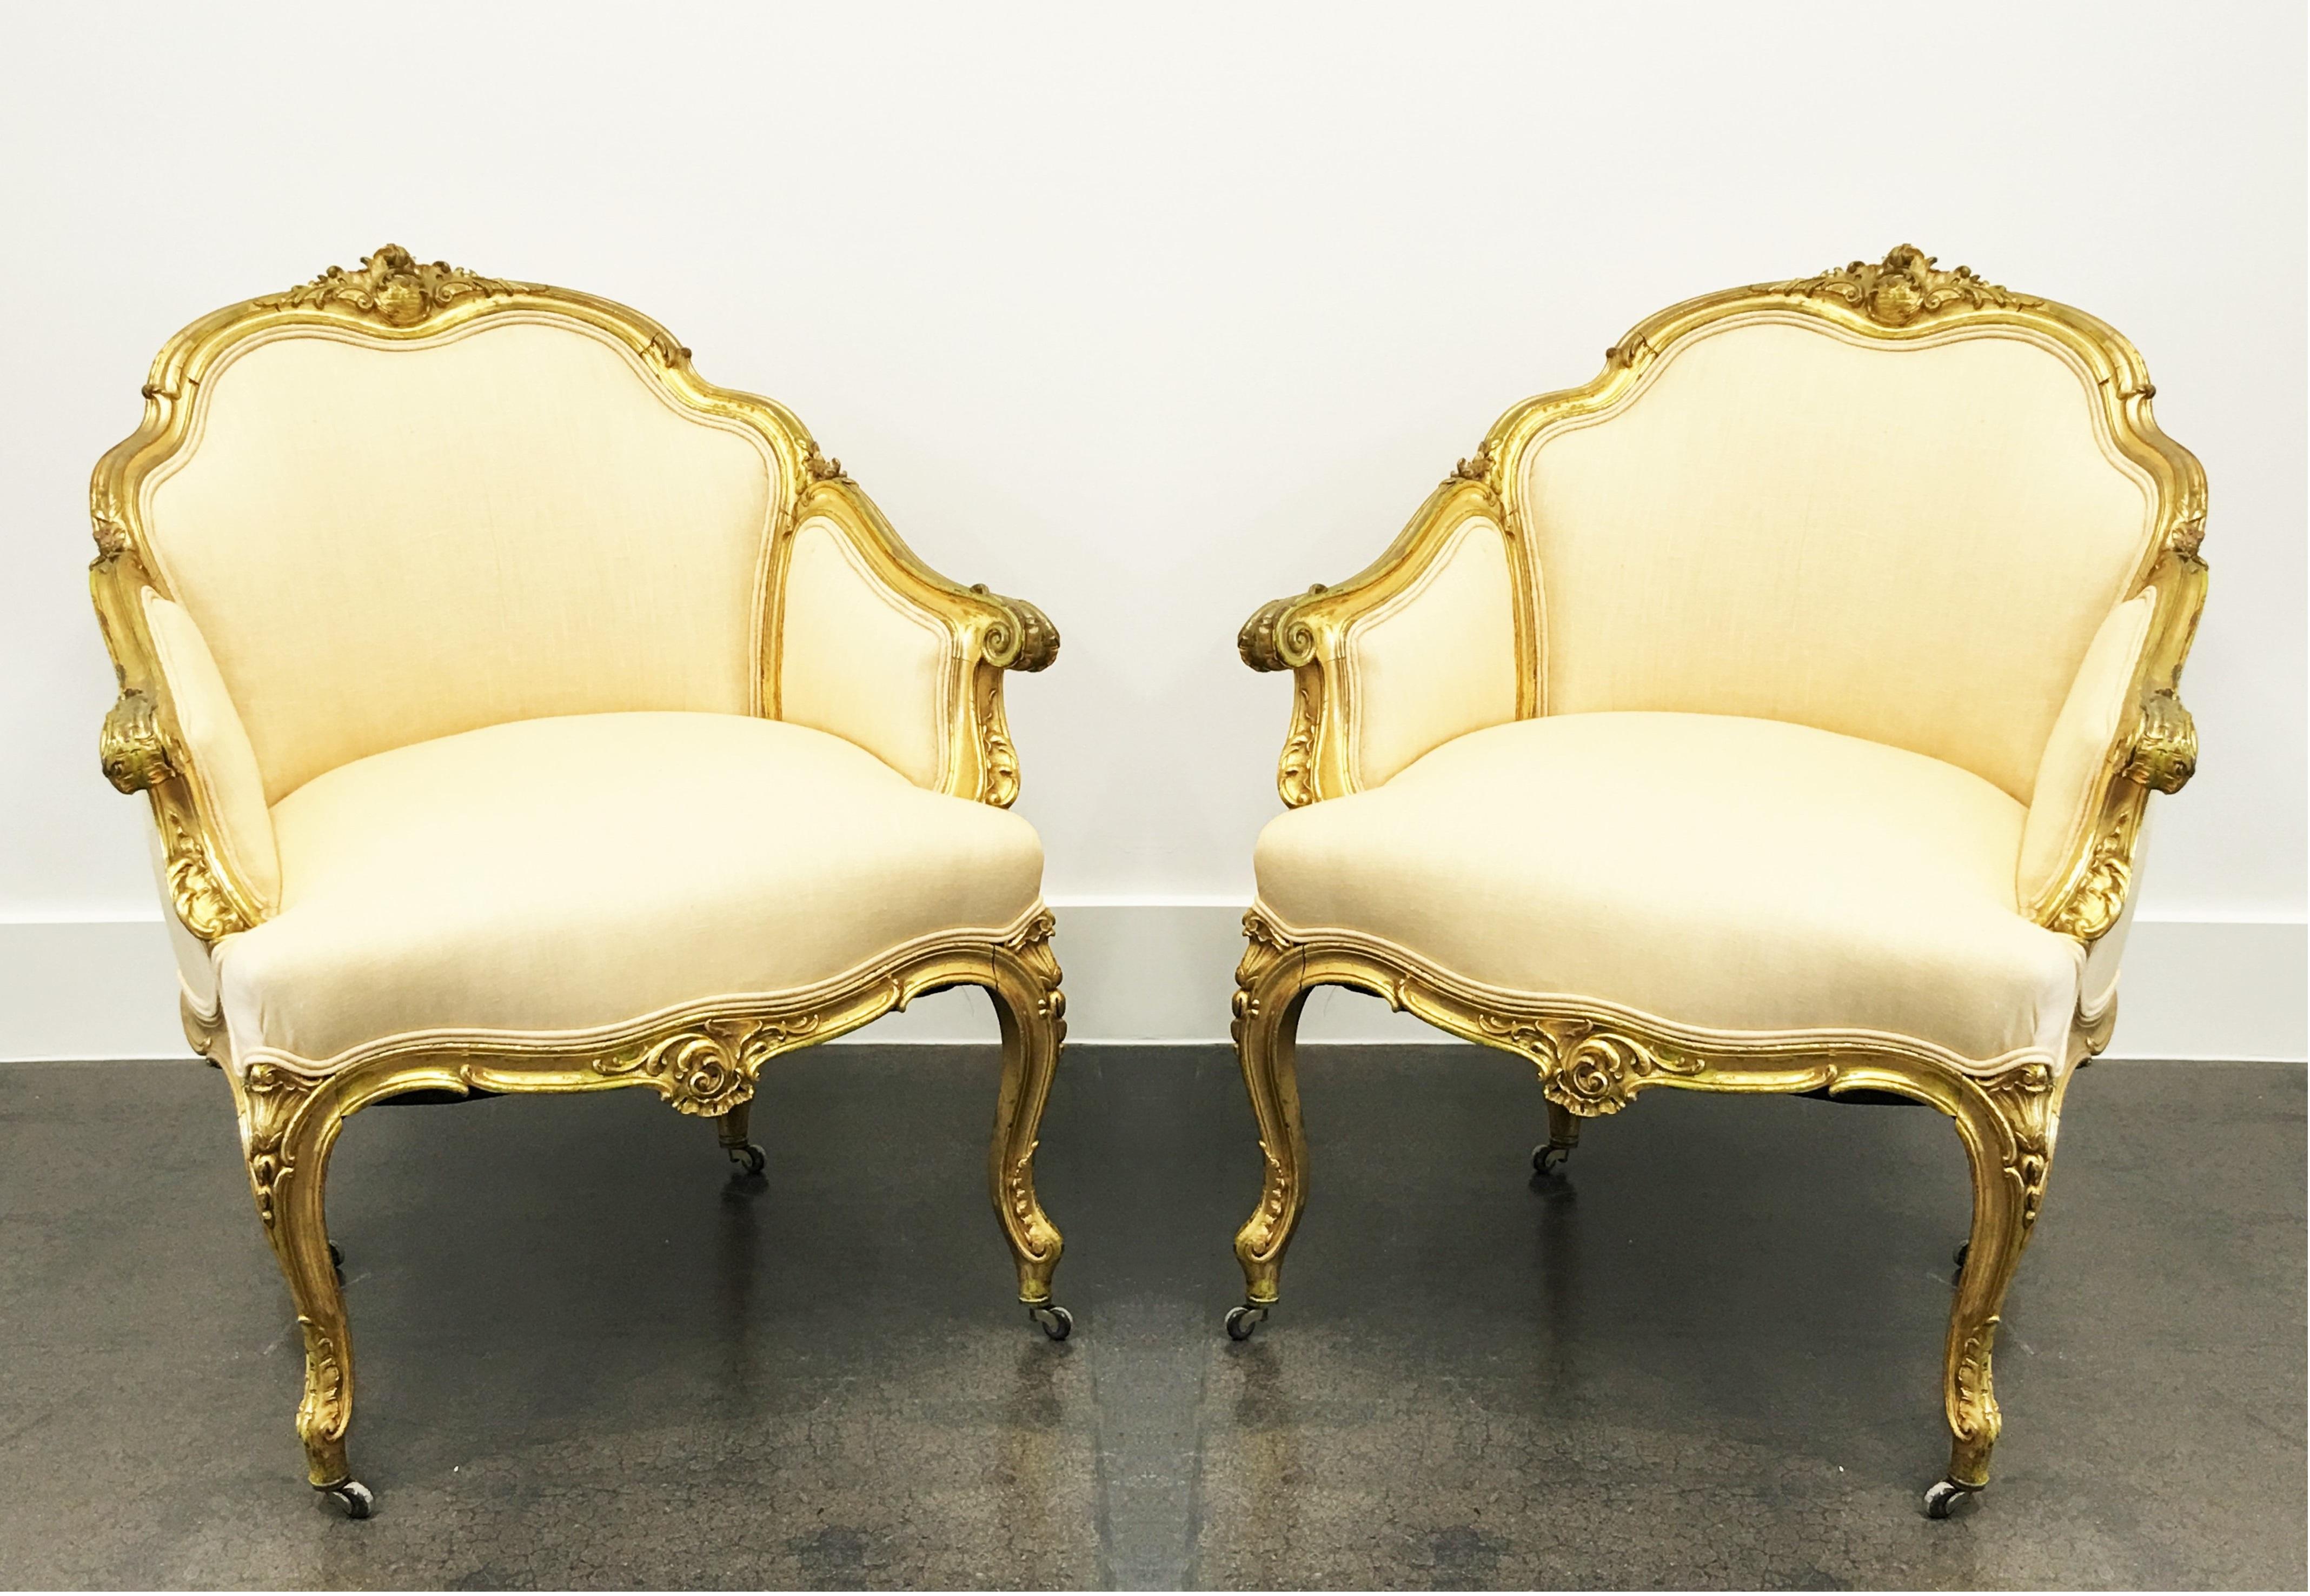 Wonderful pair of 19th century Napoleon III Louis XV bergères in the Louis XV taste. All original gilt. Featuring padded trisected back and sides surmounted by a shell and foliate crest. Centring the arbalest shaped frieze is a beautiful and richly